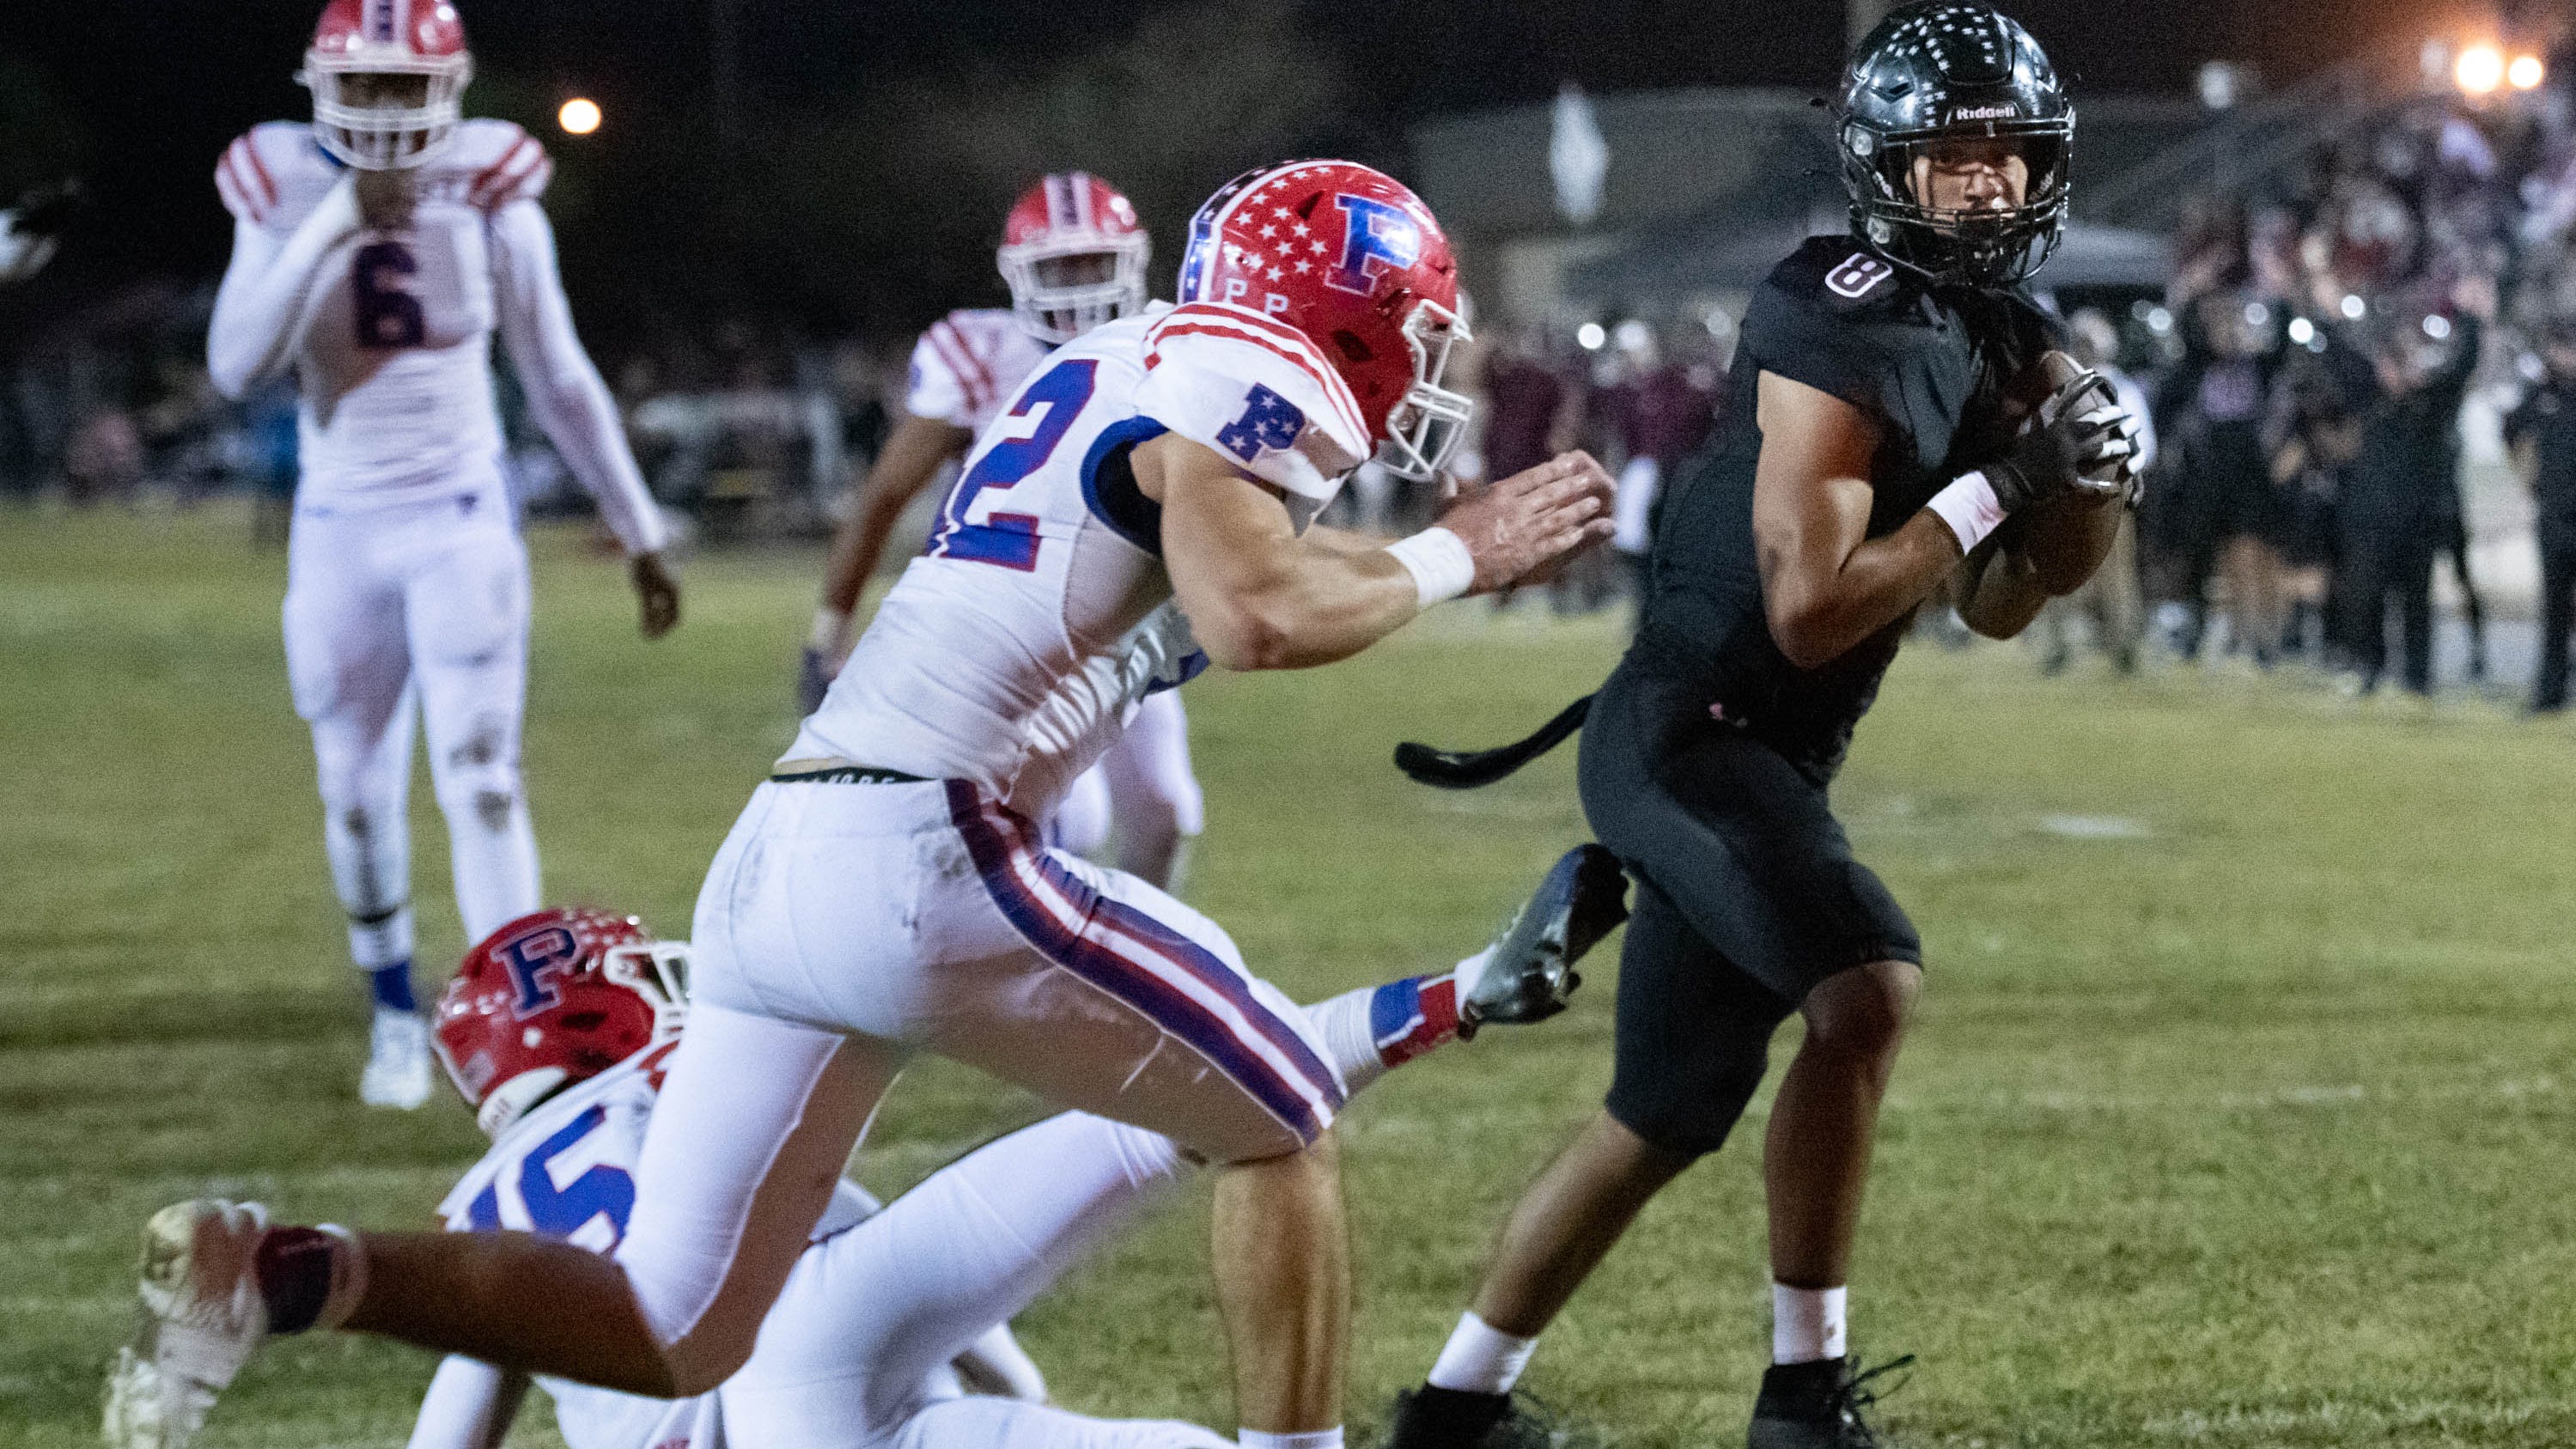 FHSAA football playoffs Final scores from Pensacola first round games